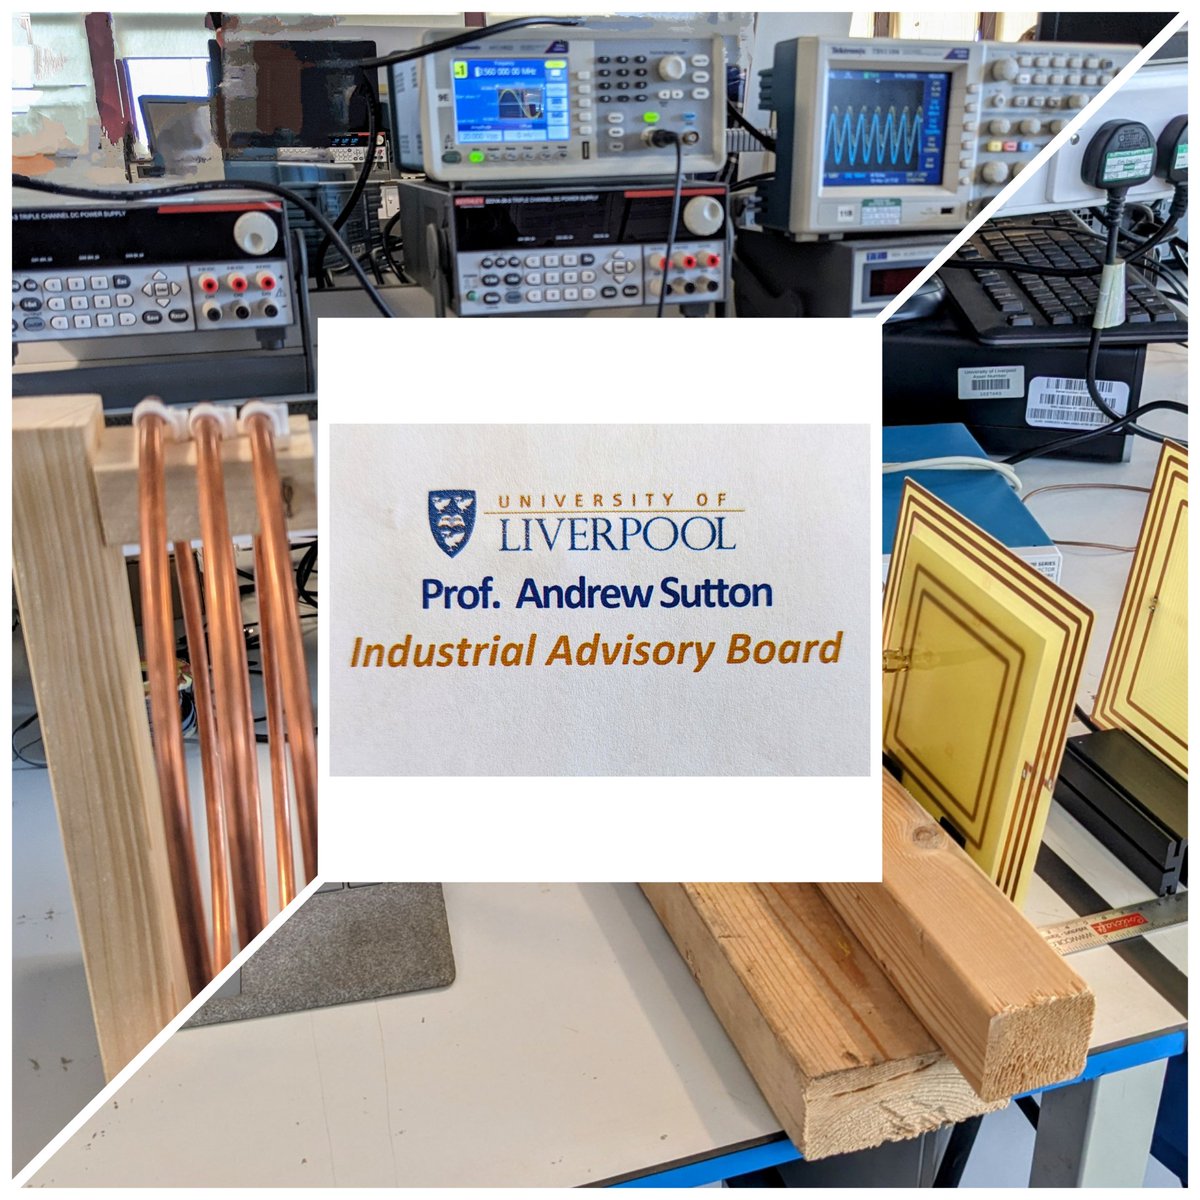 Congratulations to the final year UG and MSc students of the @LivUniEEE @LivUni - they delivered a great set of posters and practical bench demos today... #STEM #wireless #electronics